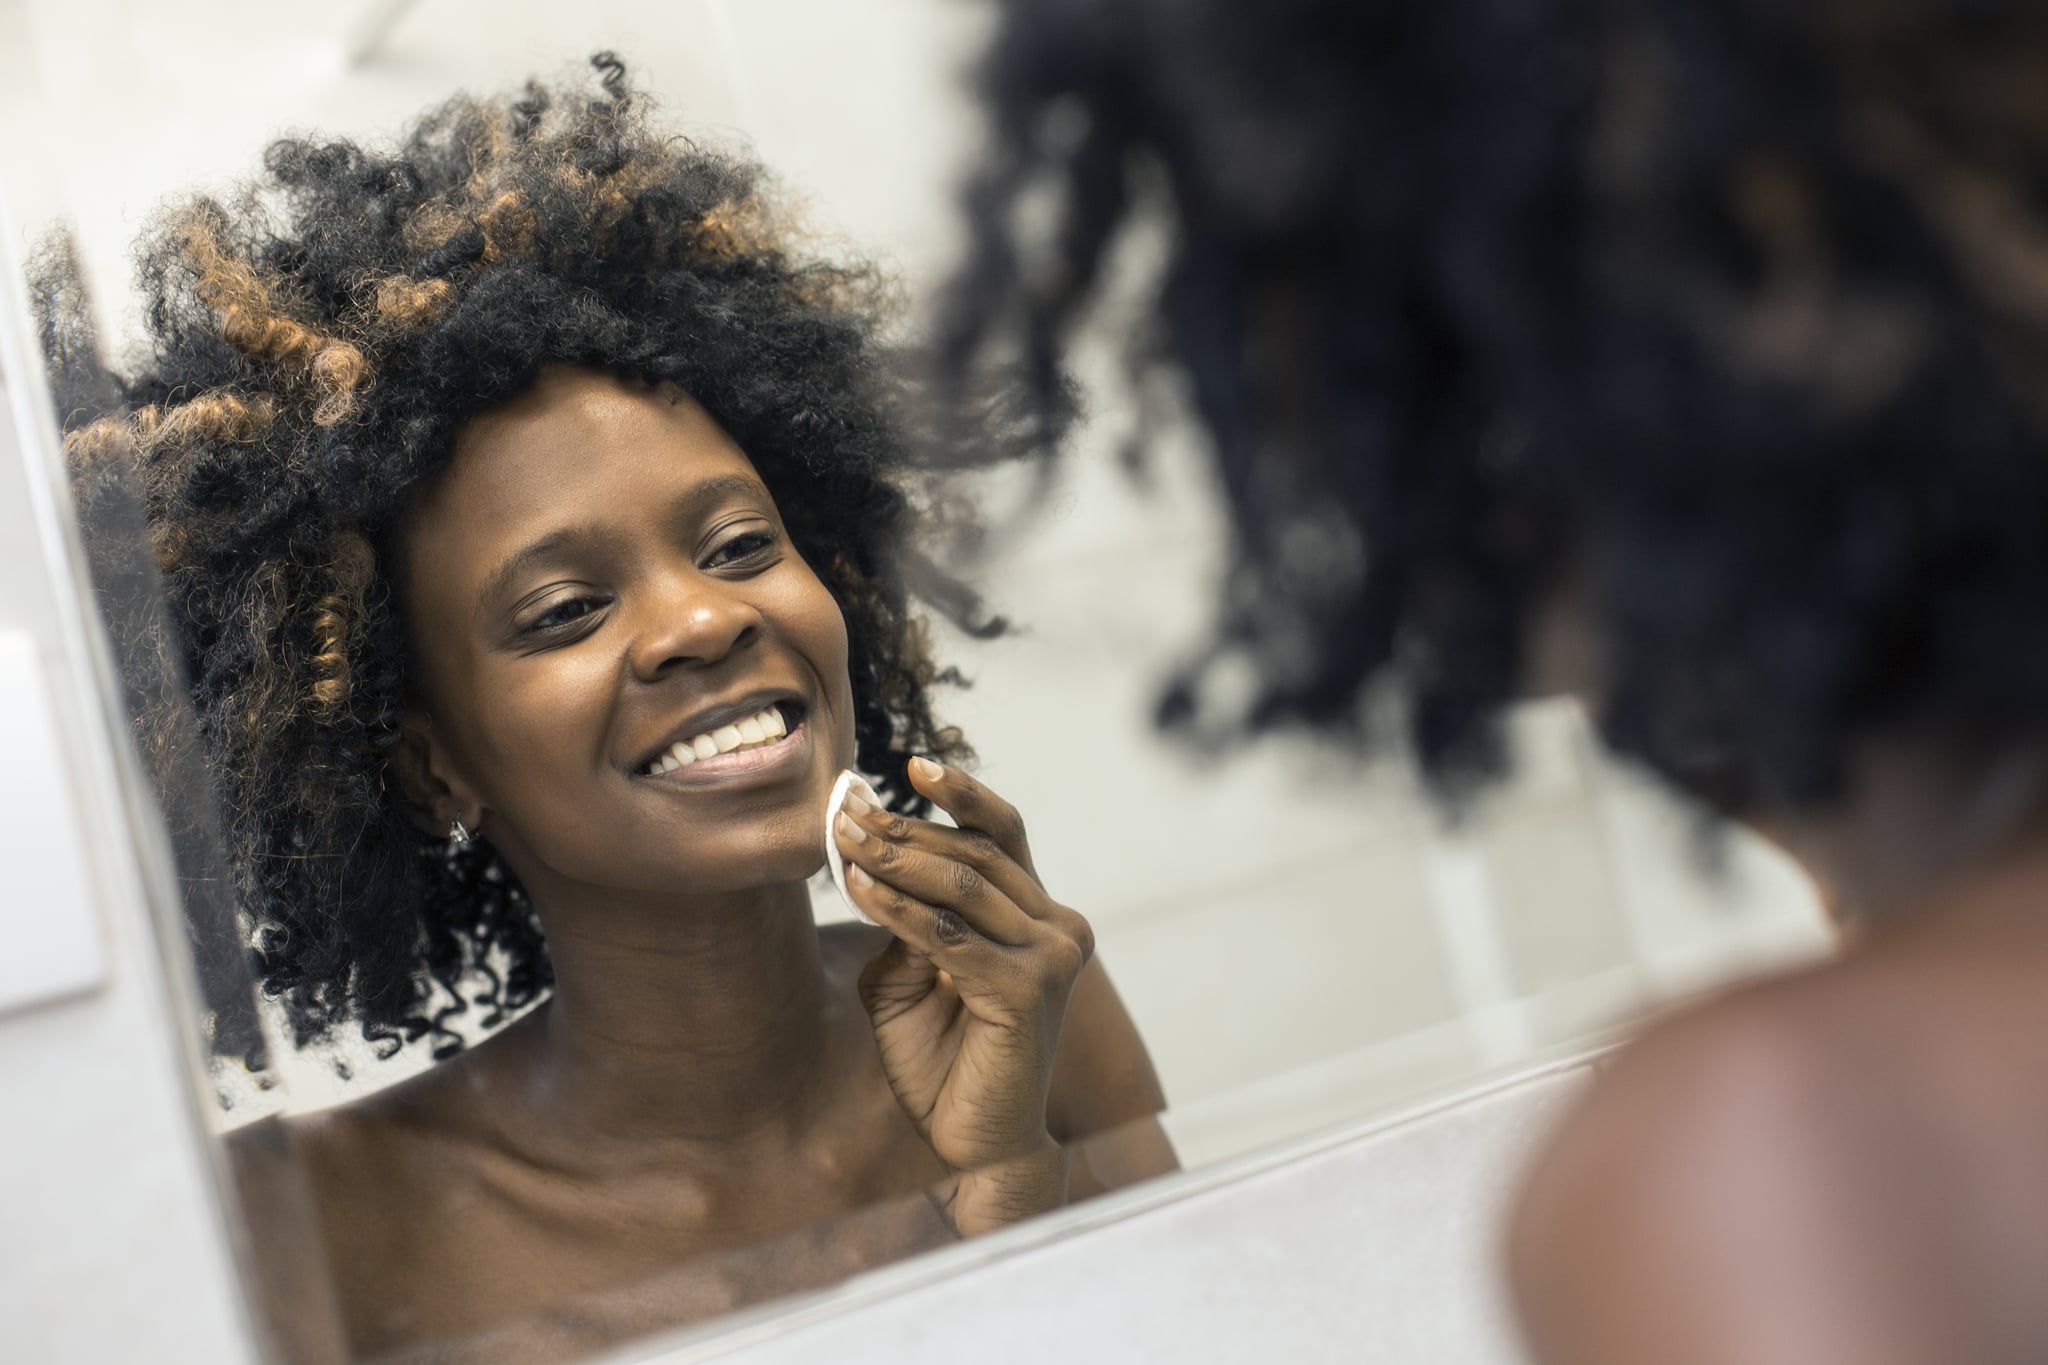 Young woman cleaning her skin in bathroom mirror with a cotton pad. About 25 years old, African female with curly hair.